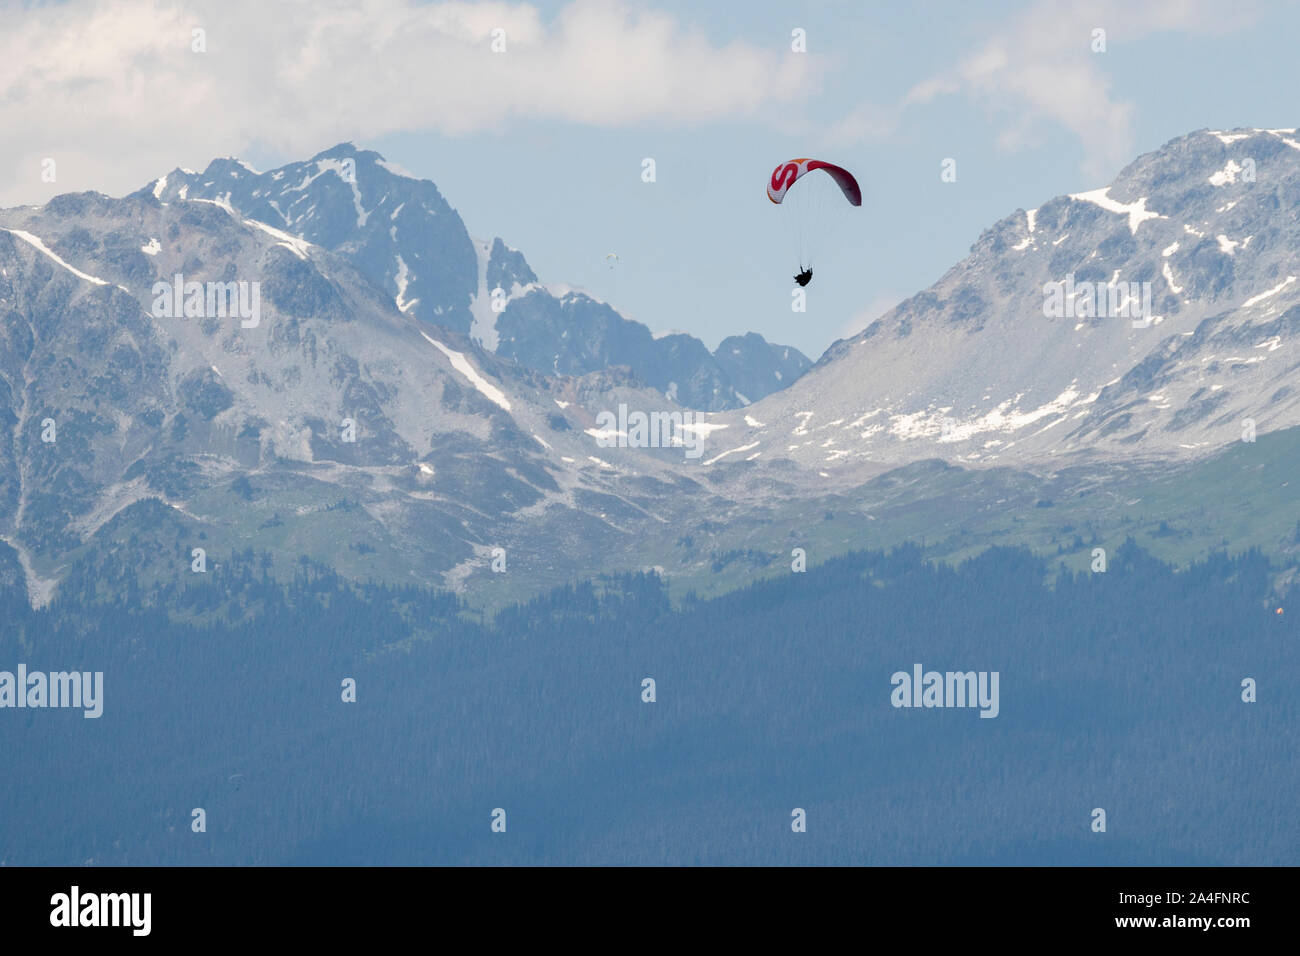 Paragliders fly high above snow covered mountains on a sunny day. Stock Photo